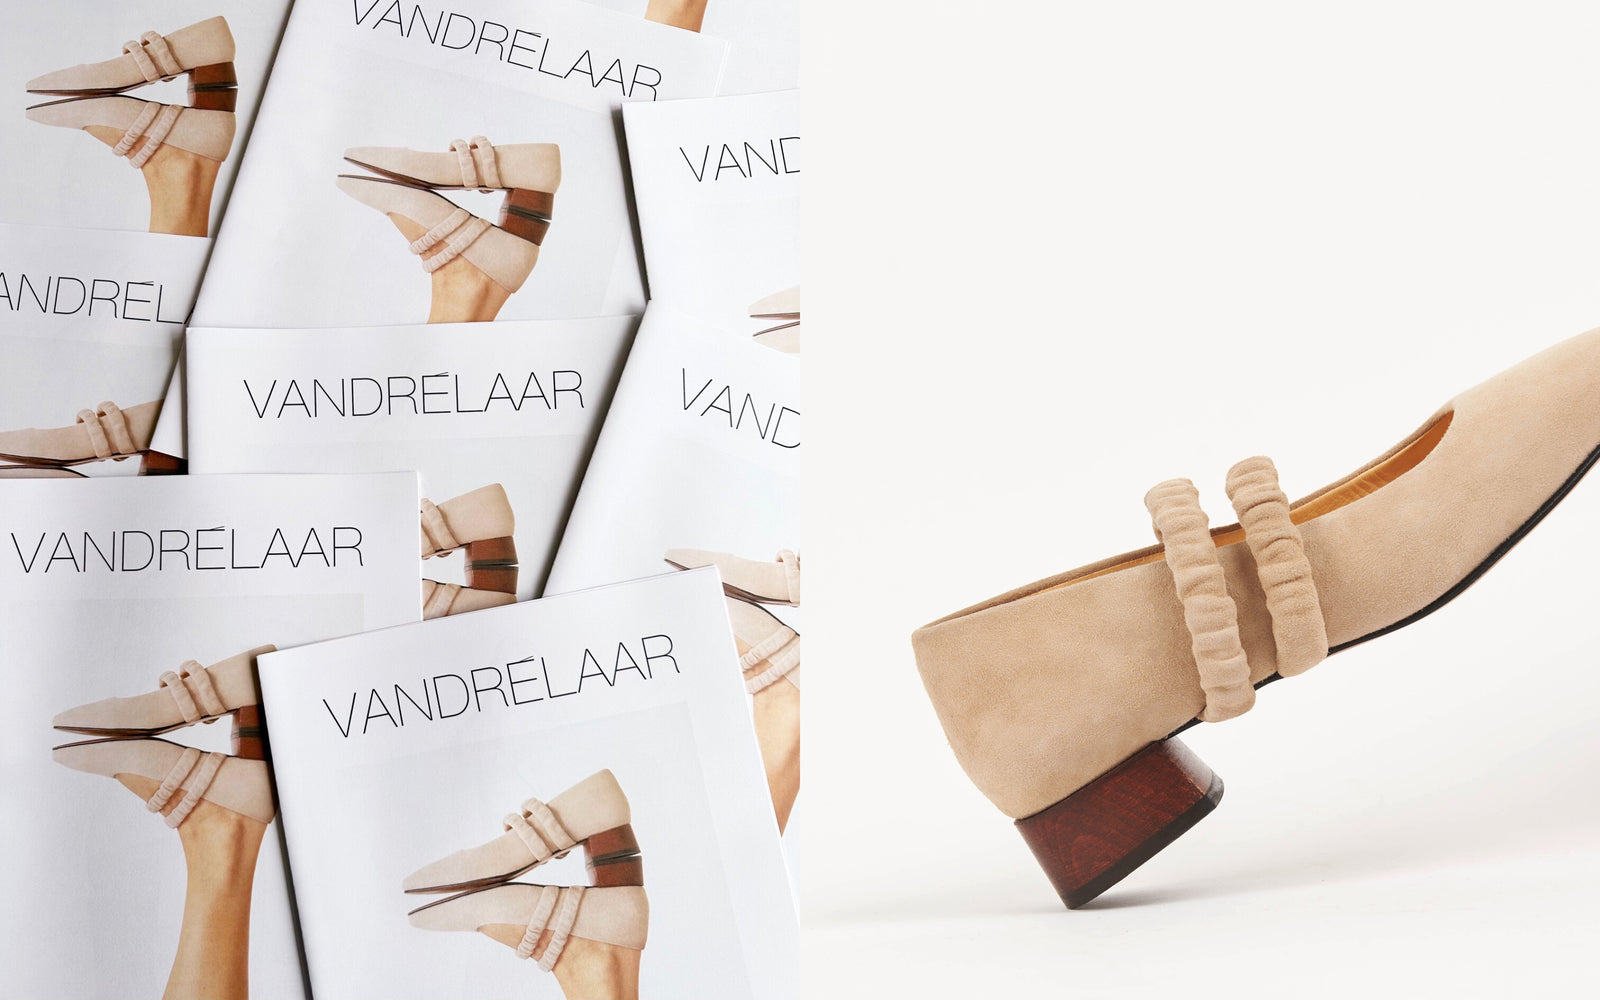 Vandrelaar ballet pump ballerina flat spring summer 2023 trend. Women's sustainable footwear made in Portugal from conscious materials. Buttery soft ballet flat for women made from suede with a wooden heel and scrunchie elastics. Ballerina with elastic around instep.